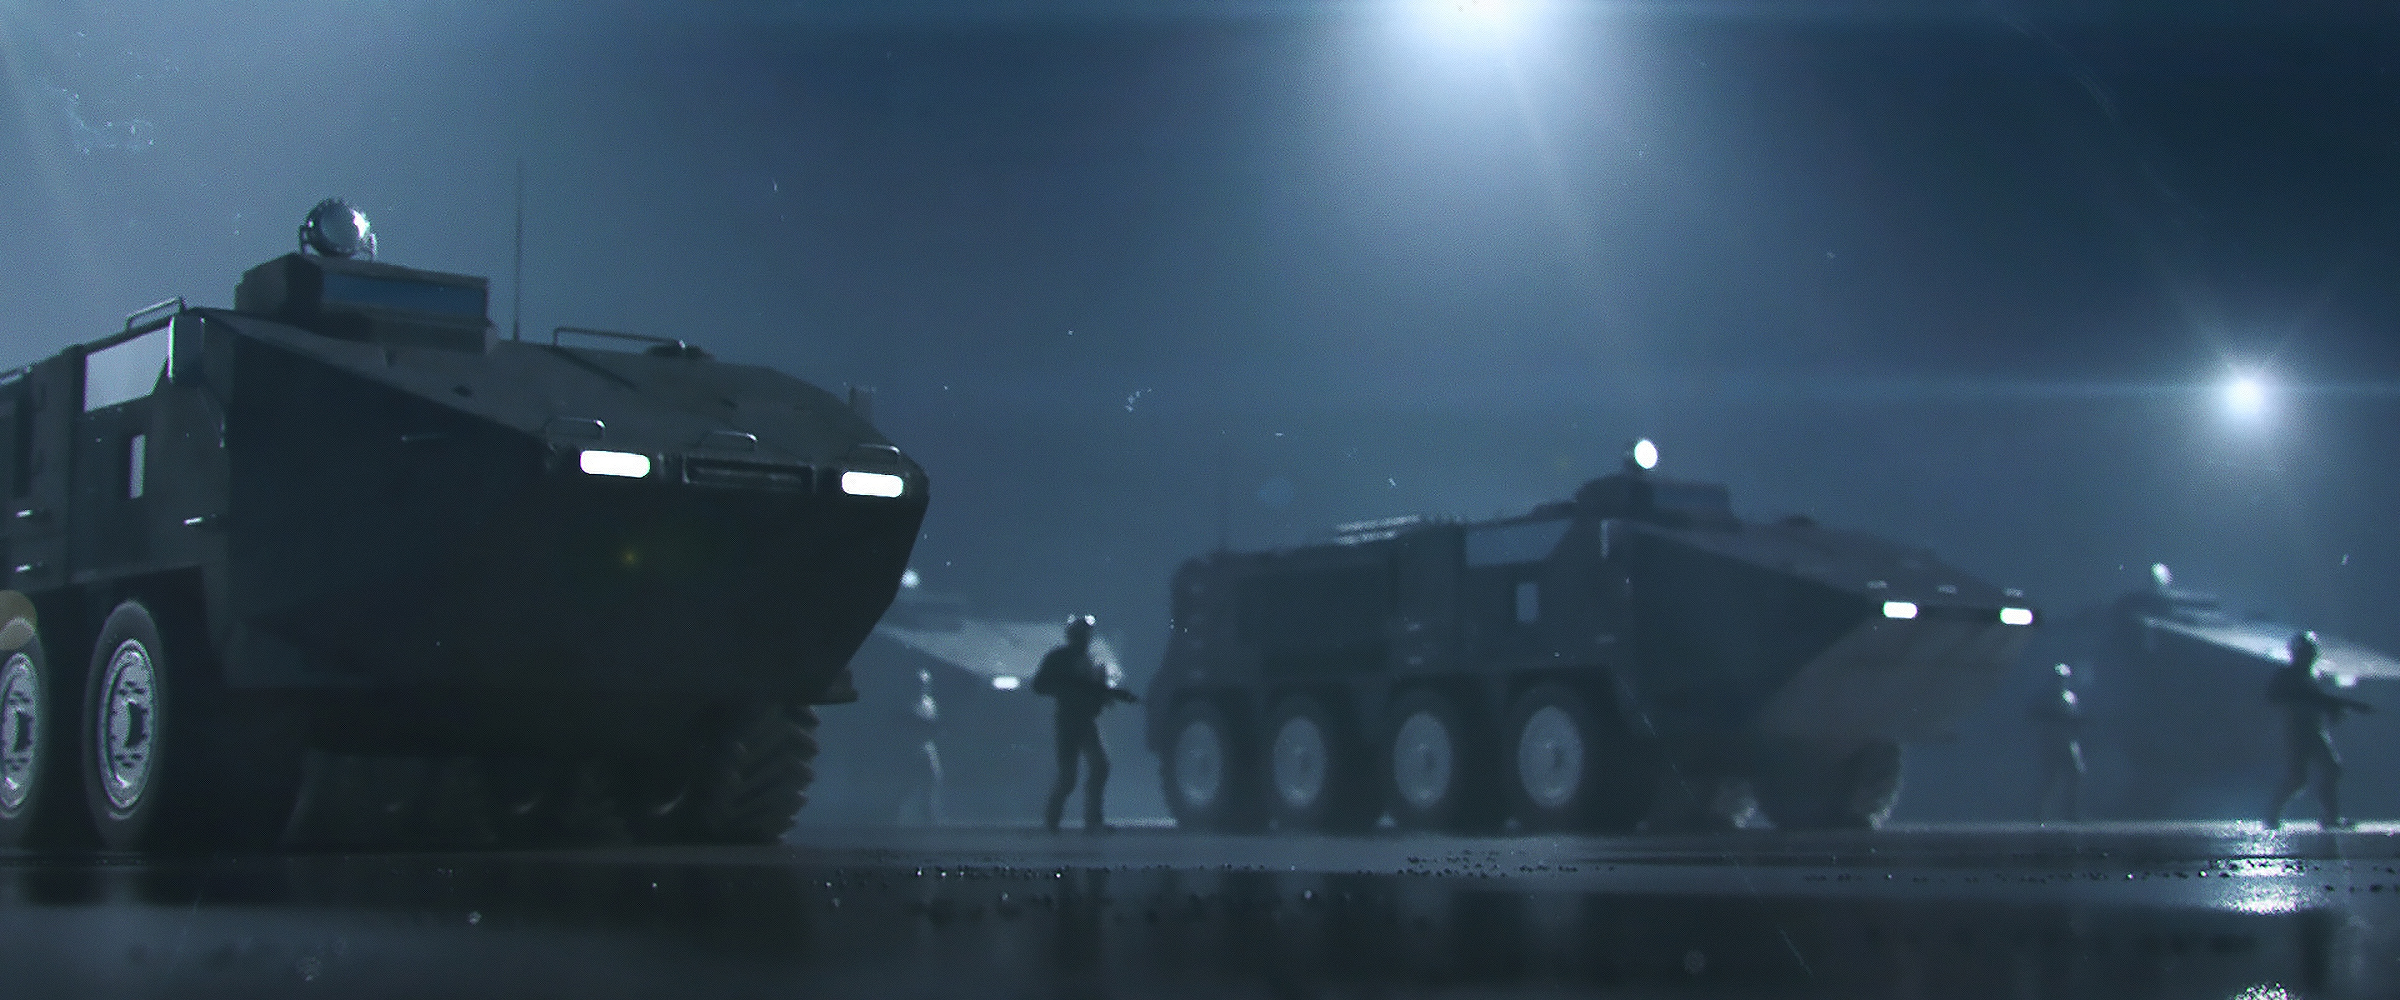 Armored Vehicle Military Night Soldier 2400x1000